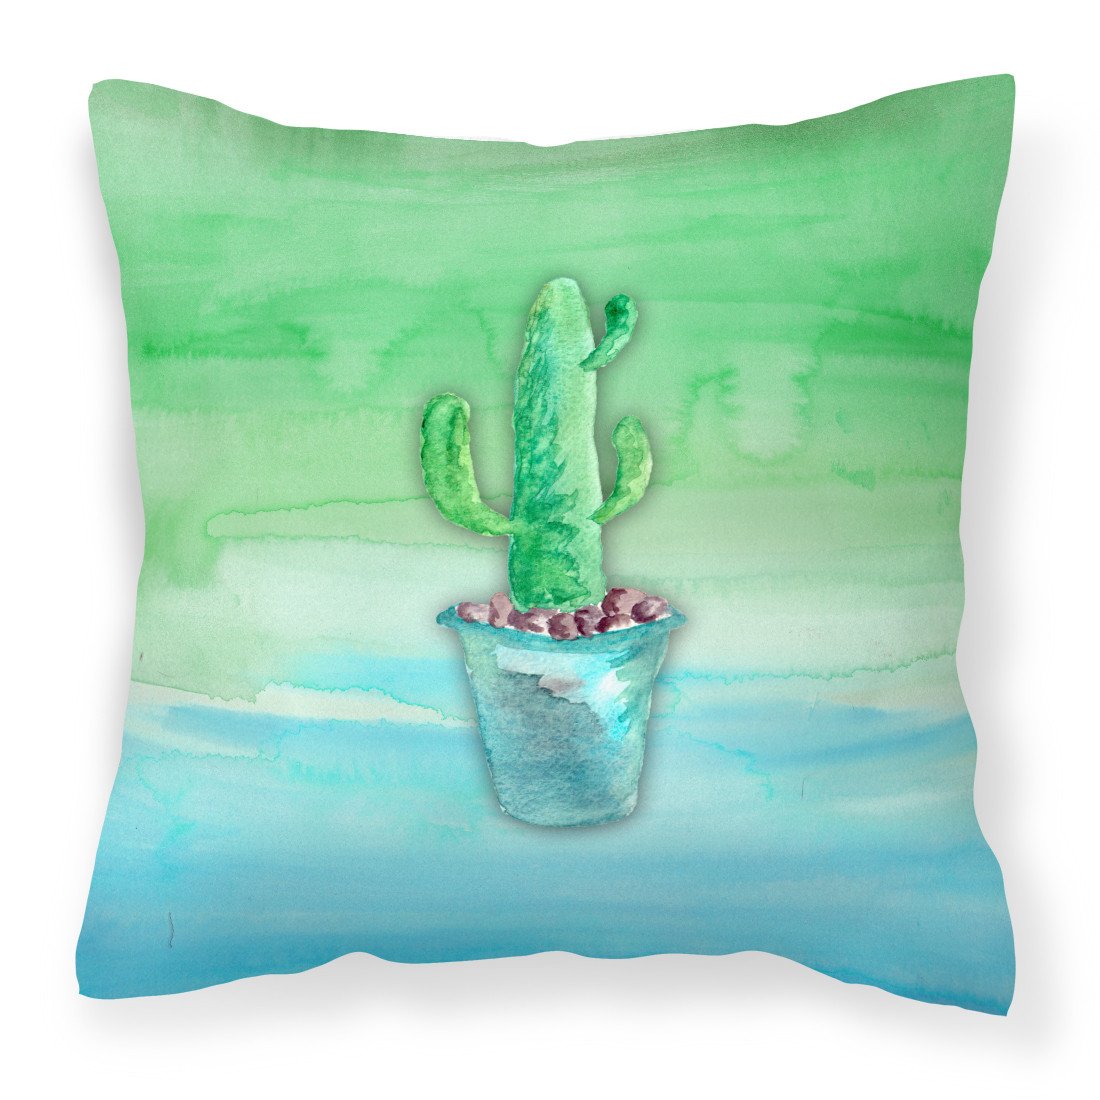 Cactus Teal and Green Watercolor Fabric Decorative Pillow BB7362PW1818 by Caroline's Treasures